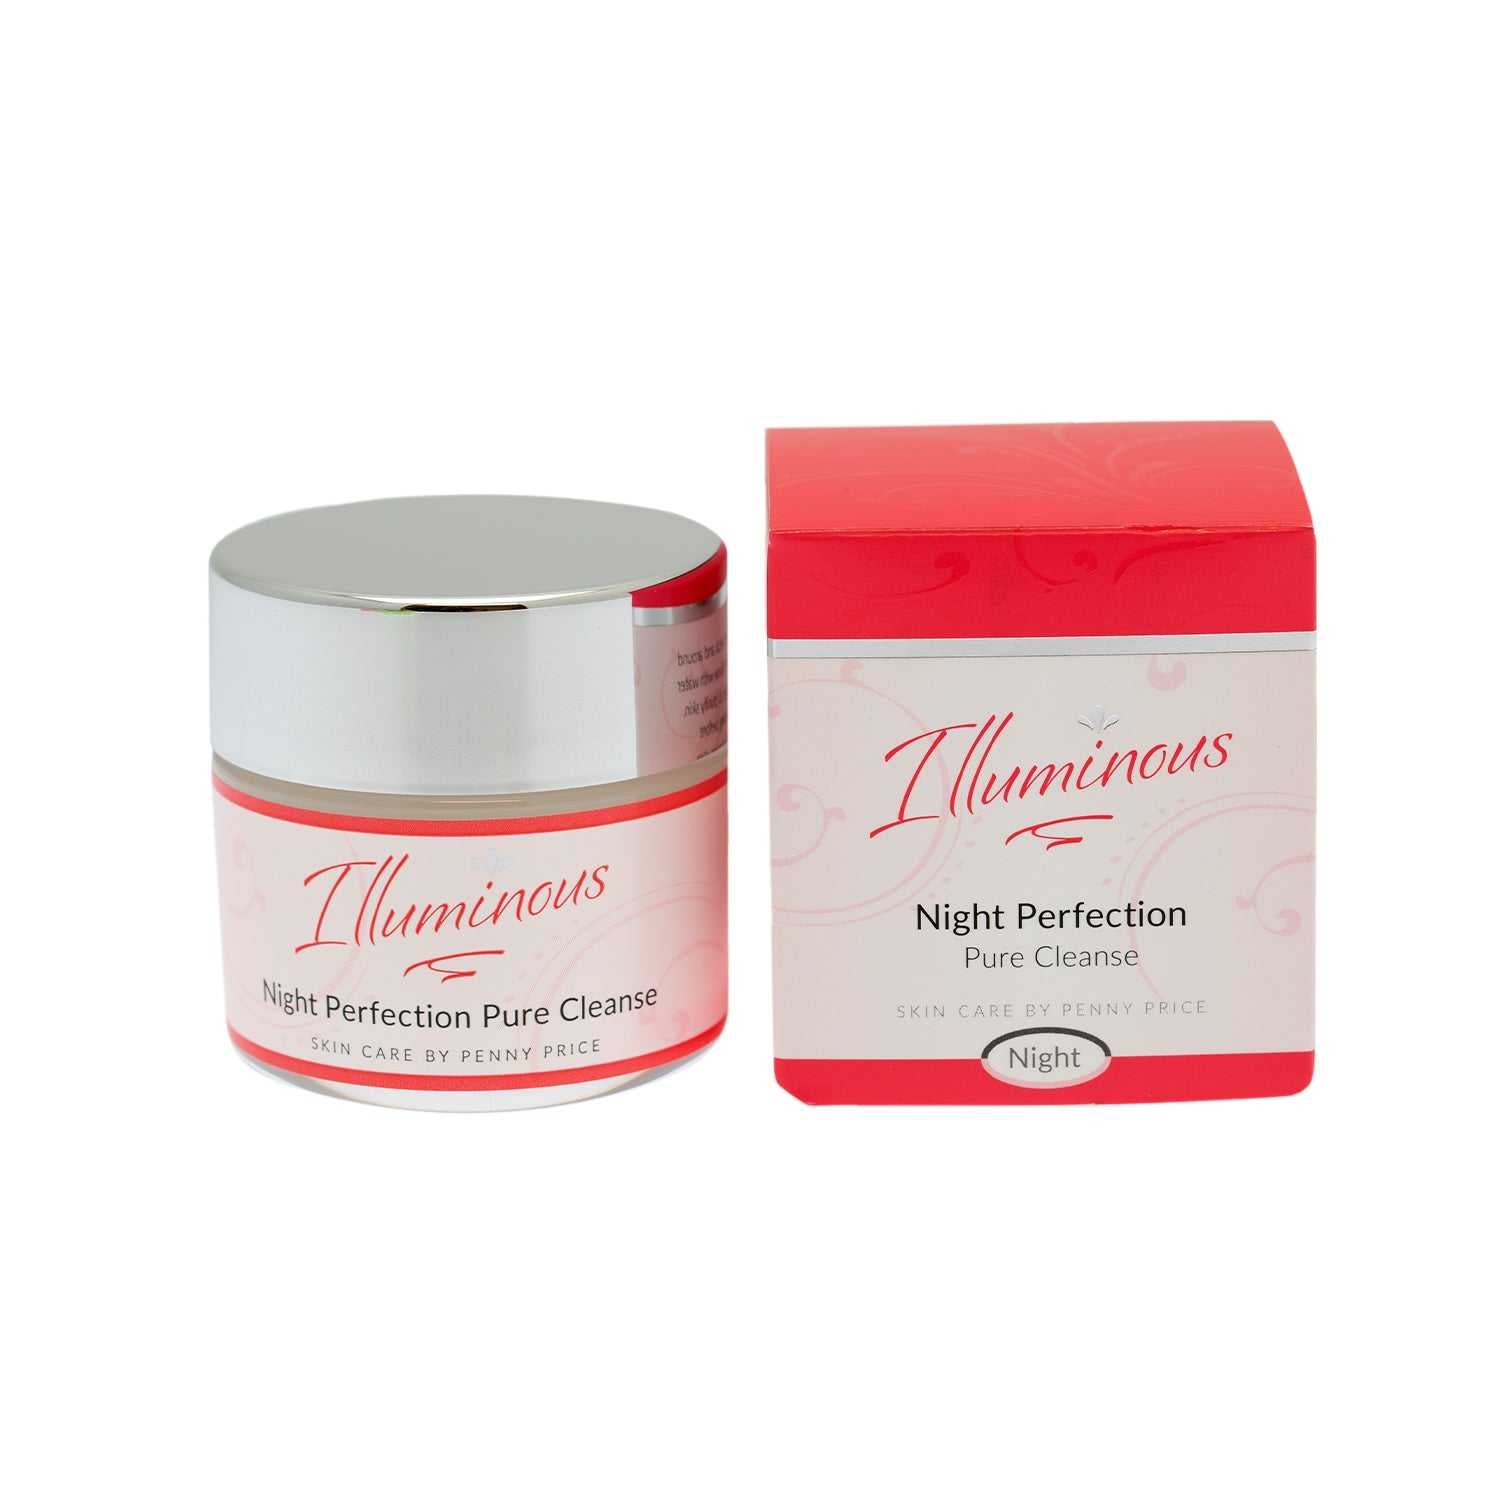 Night Perfection Pure Cleanse